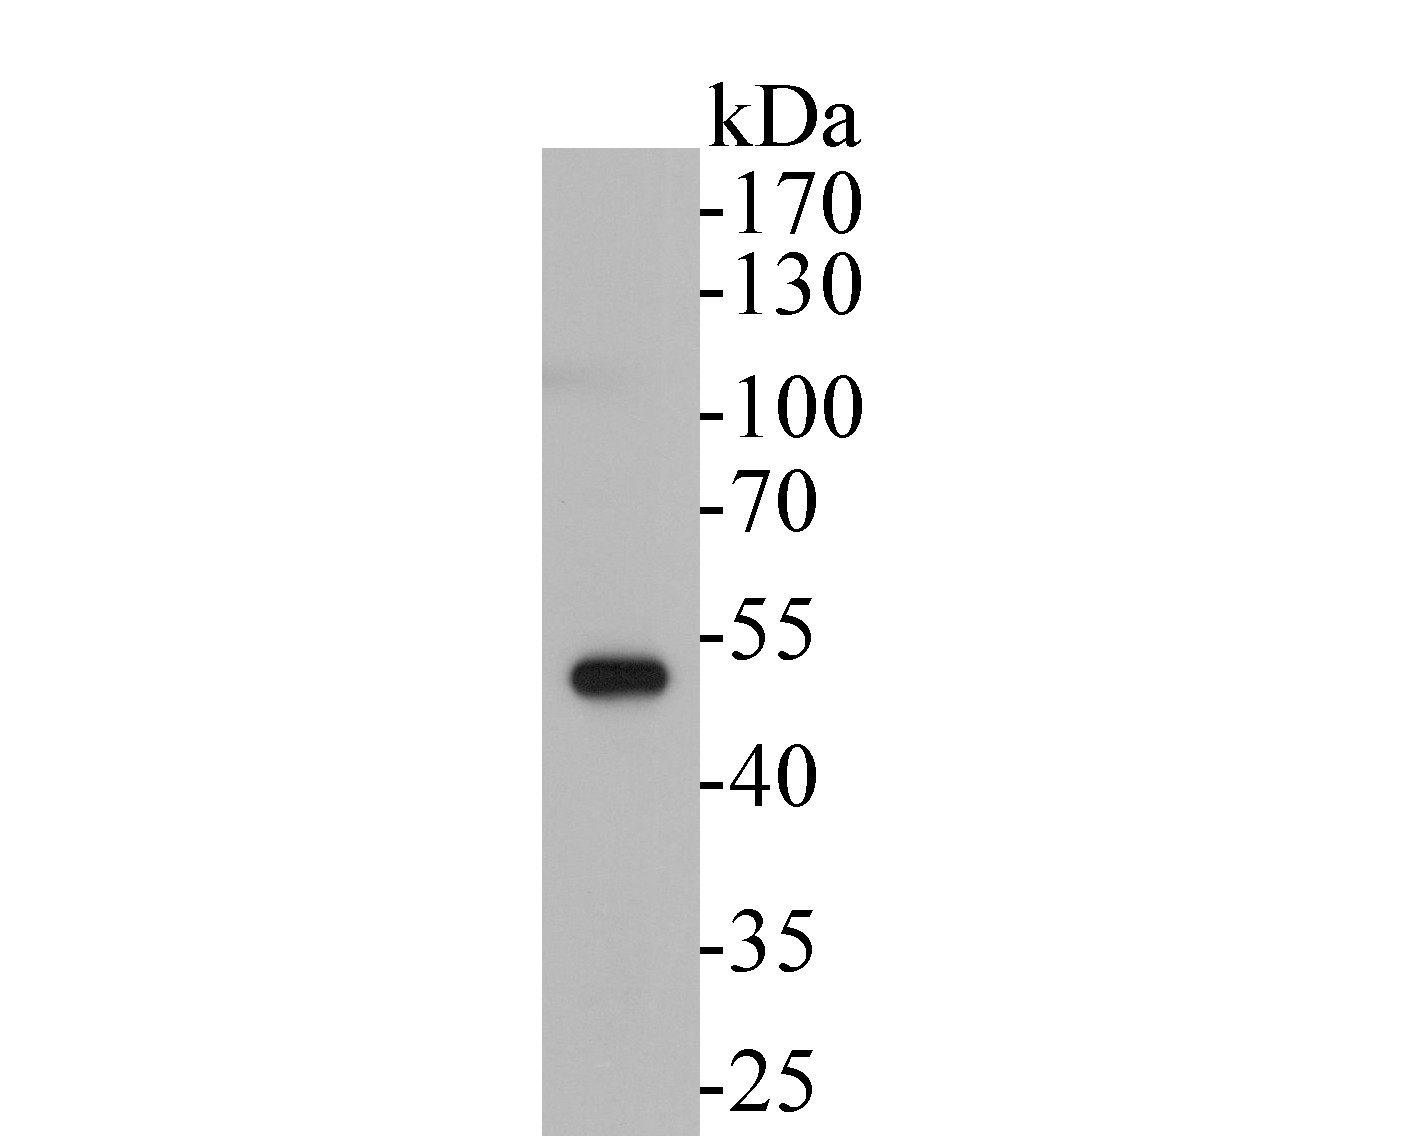 Western blot analysis of RUVB2 on A549 cell lysates. Proteins were transferred to a PVDF membrane and blocked with 5% BSA in PBS for 1 hour at room temperature. The primary antibody (EM1901-59, 1/500) was used in 5% BSA at room temperature for 2 hours. Goat Anti-Mouse IgG - HRP Secondary Antibody (HA1006) at 1:5,000 dilution was used for 1 hour at room temperature.